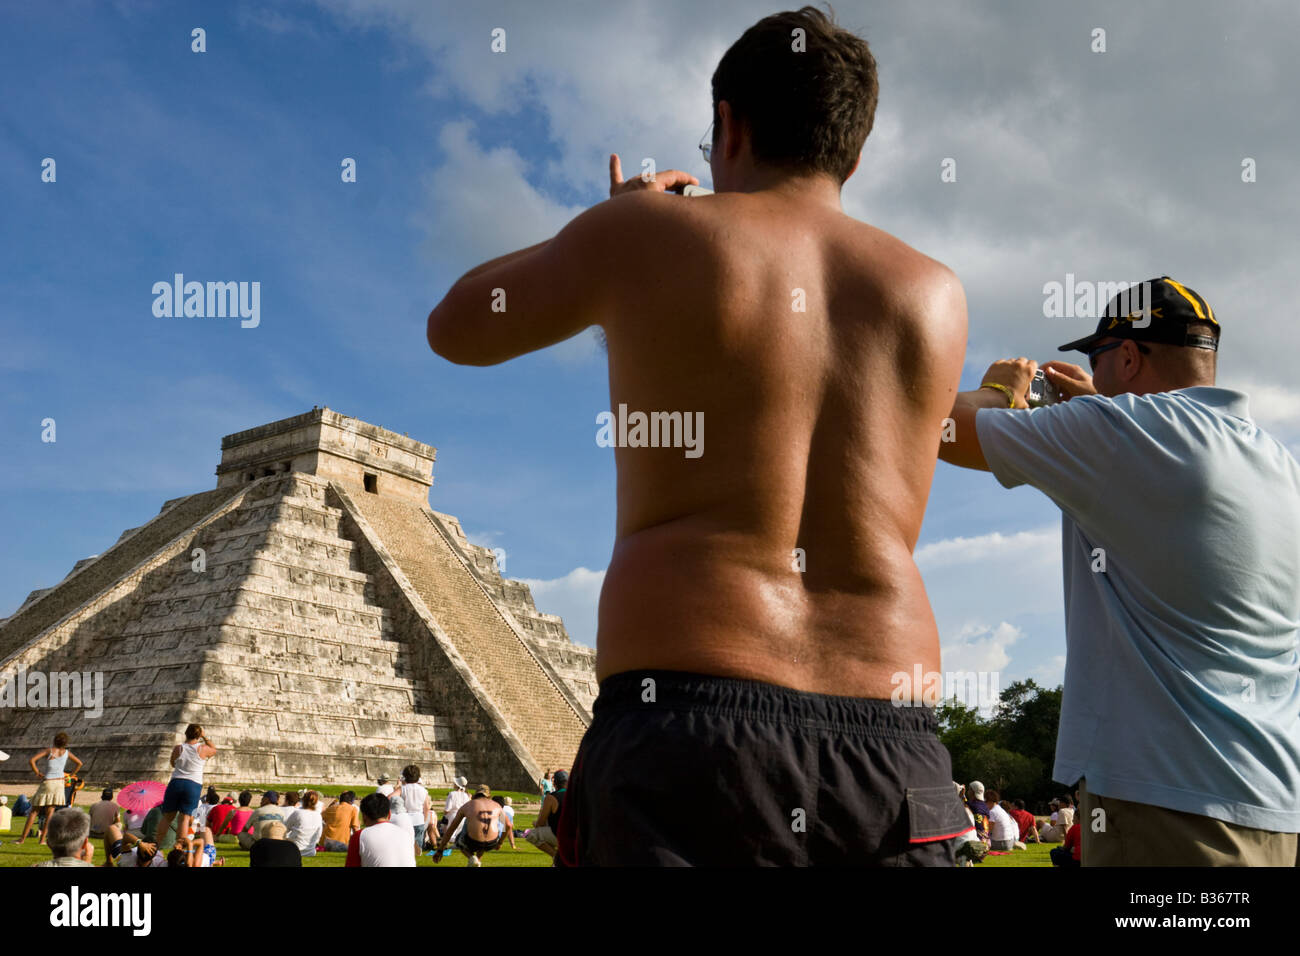 Tourists viewing El Castillo Pyramid of Kukulcan 'The Castle' during the fall equinox at the Mayan site of Chichen Itza, Mexico. Stock Photo